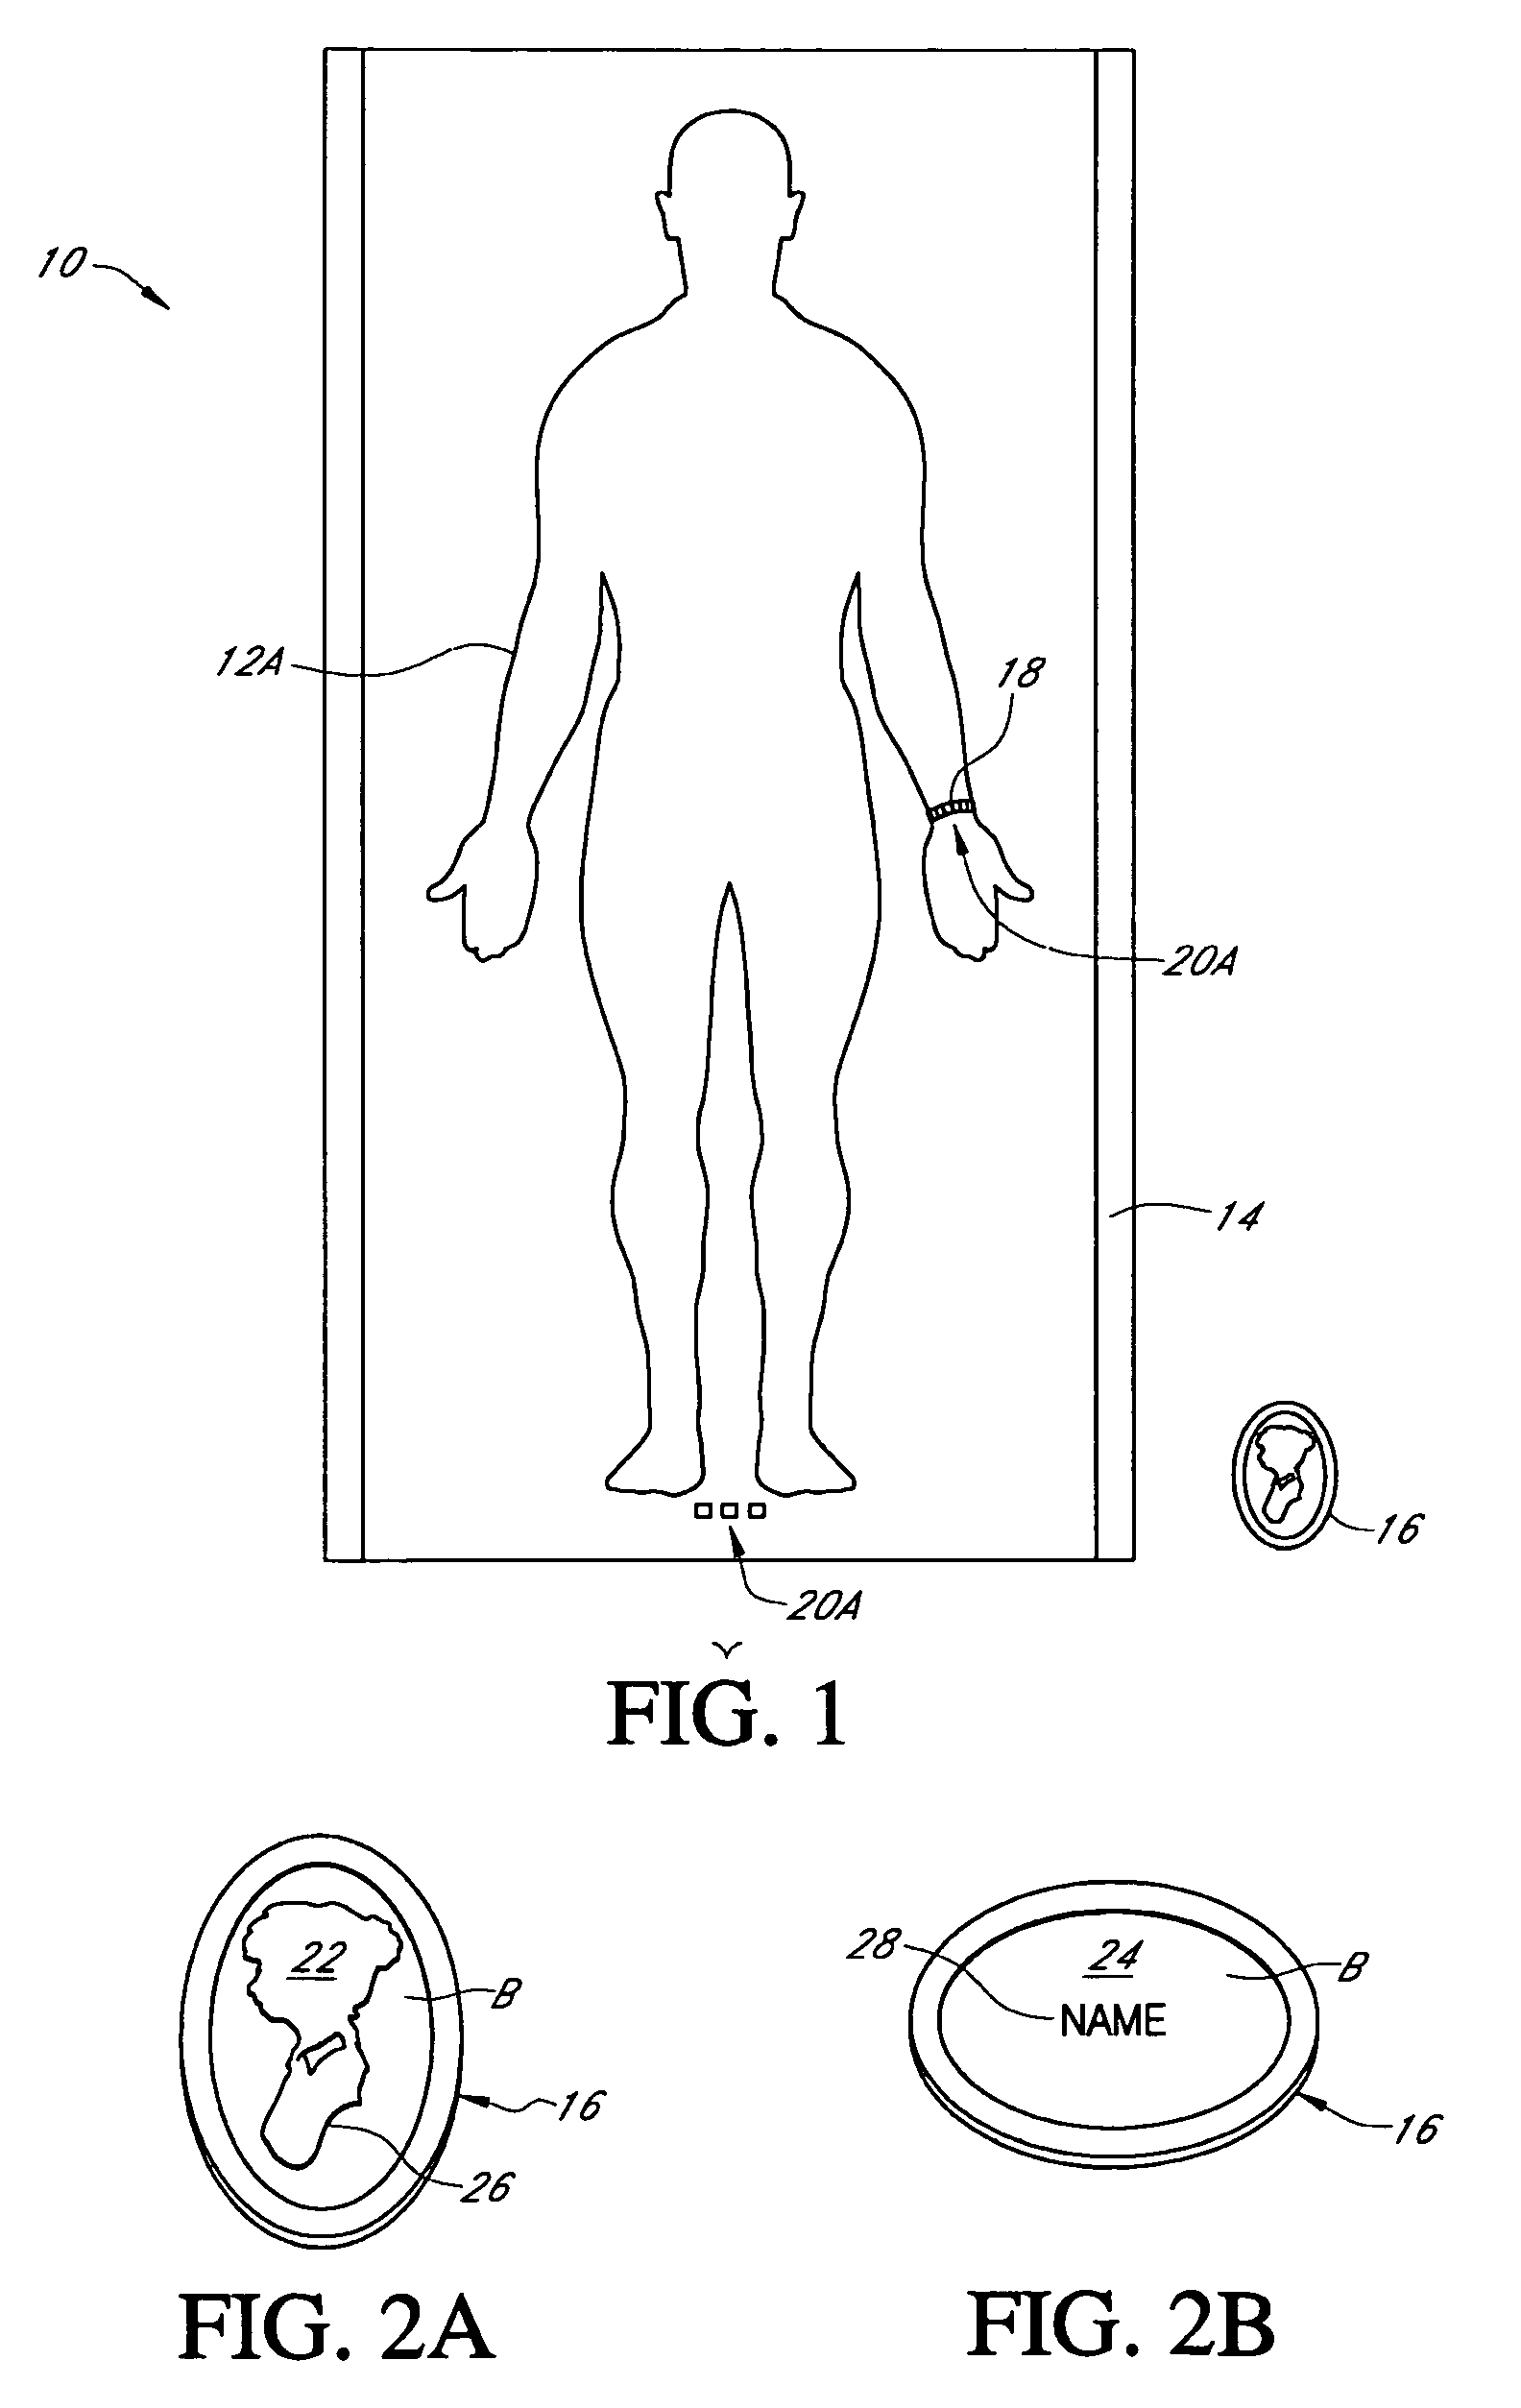 Cremation identification system and method for use of same